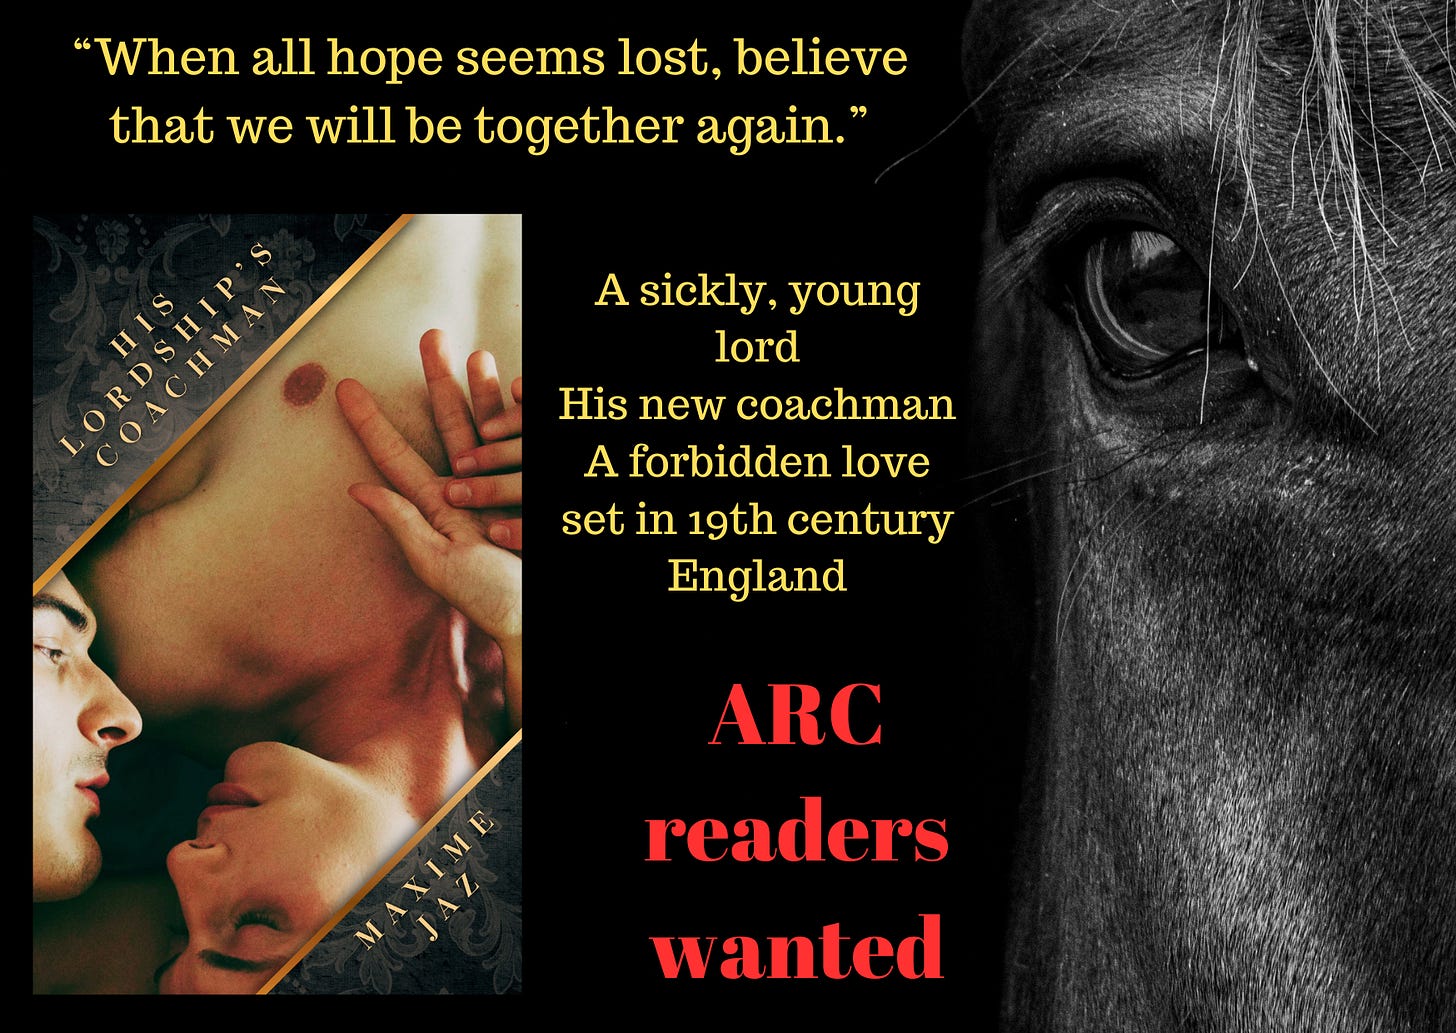 promo board on black background book cover on the left: Book cover, dark grey and grey tapestry background, top left corner the title in golden letters His Lordship's Coachman, bottom right Maxime Jaz. In the middle a picture between golden border, across the cover. A man's face on the left, and upside down a young man's face, his naked chest, and the men's holding hands on it, one finger close to the young man's nipple. They look at each other, in love. Texts in yellow when all hope seems lost, believe that we will be together again." A sickly young lord, his new coachman, a forbidden love set in 19th century England Red text ARC readers wanted. On the right a horse's eye, mane and head partially visible